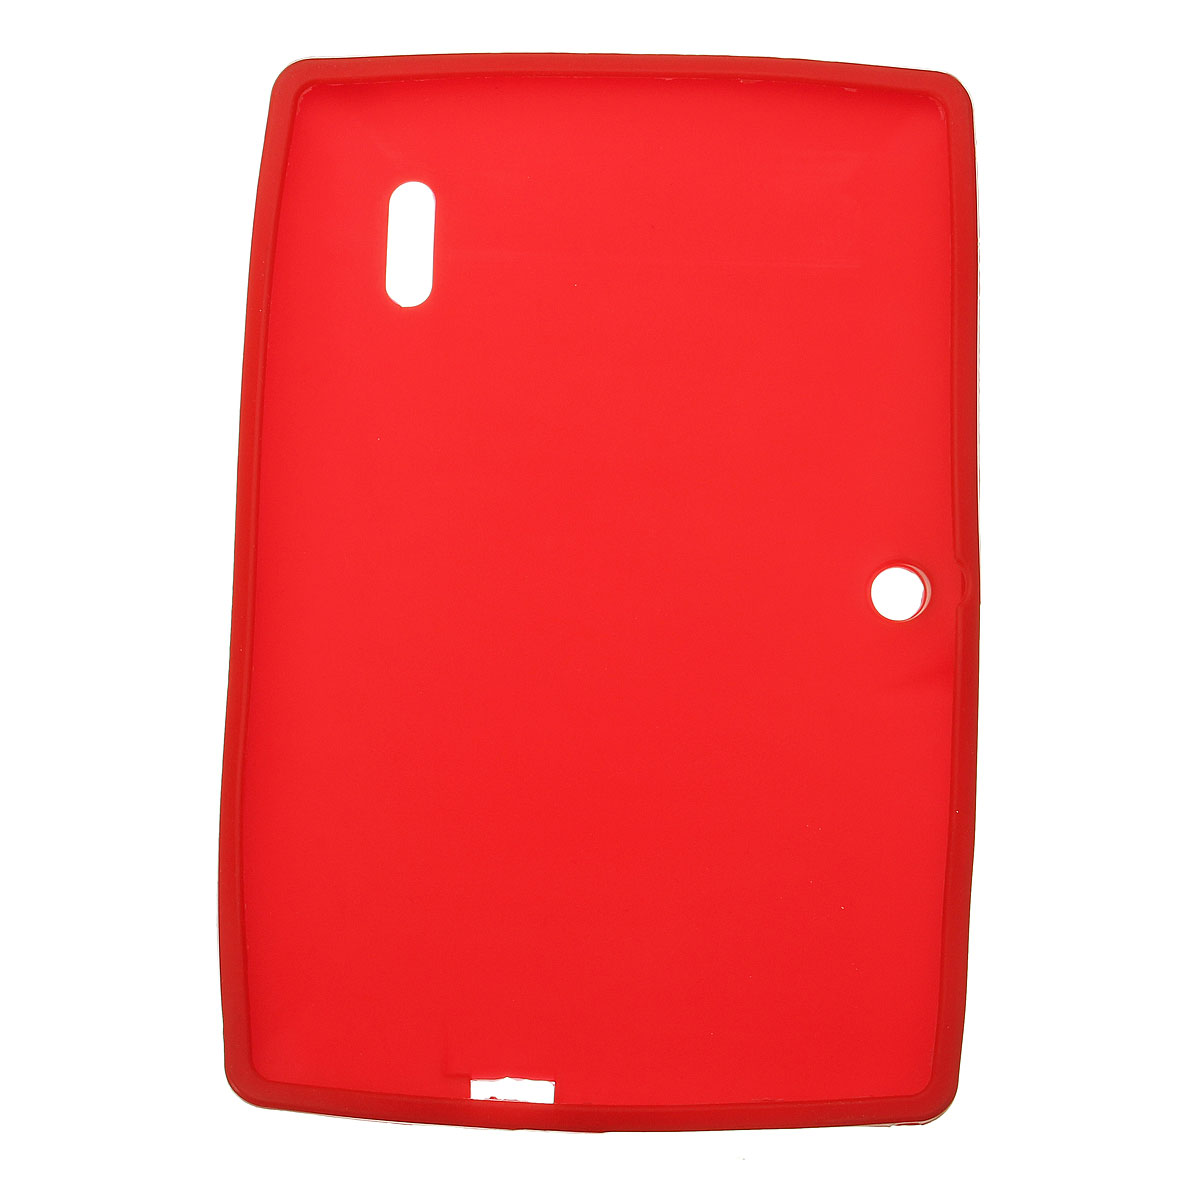 Multi-color Soft Silicone Protective Back Cover Case For 7 Inch Tablet PC